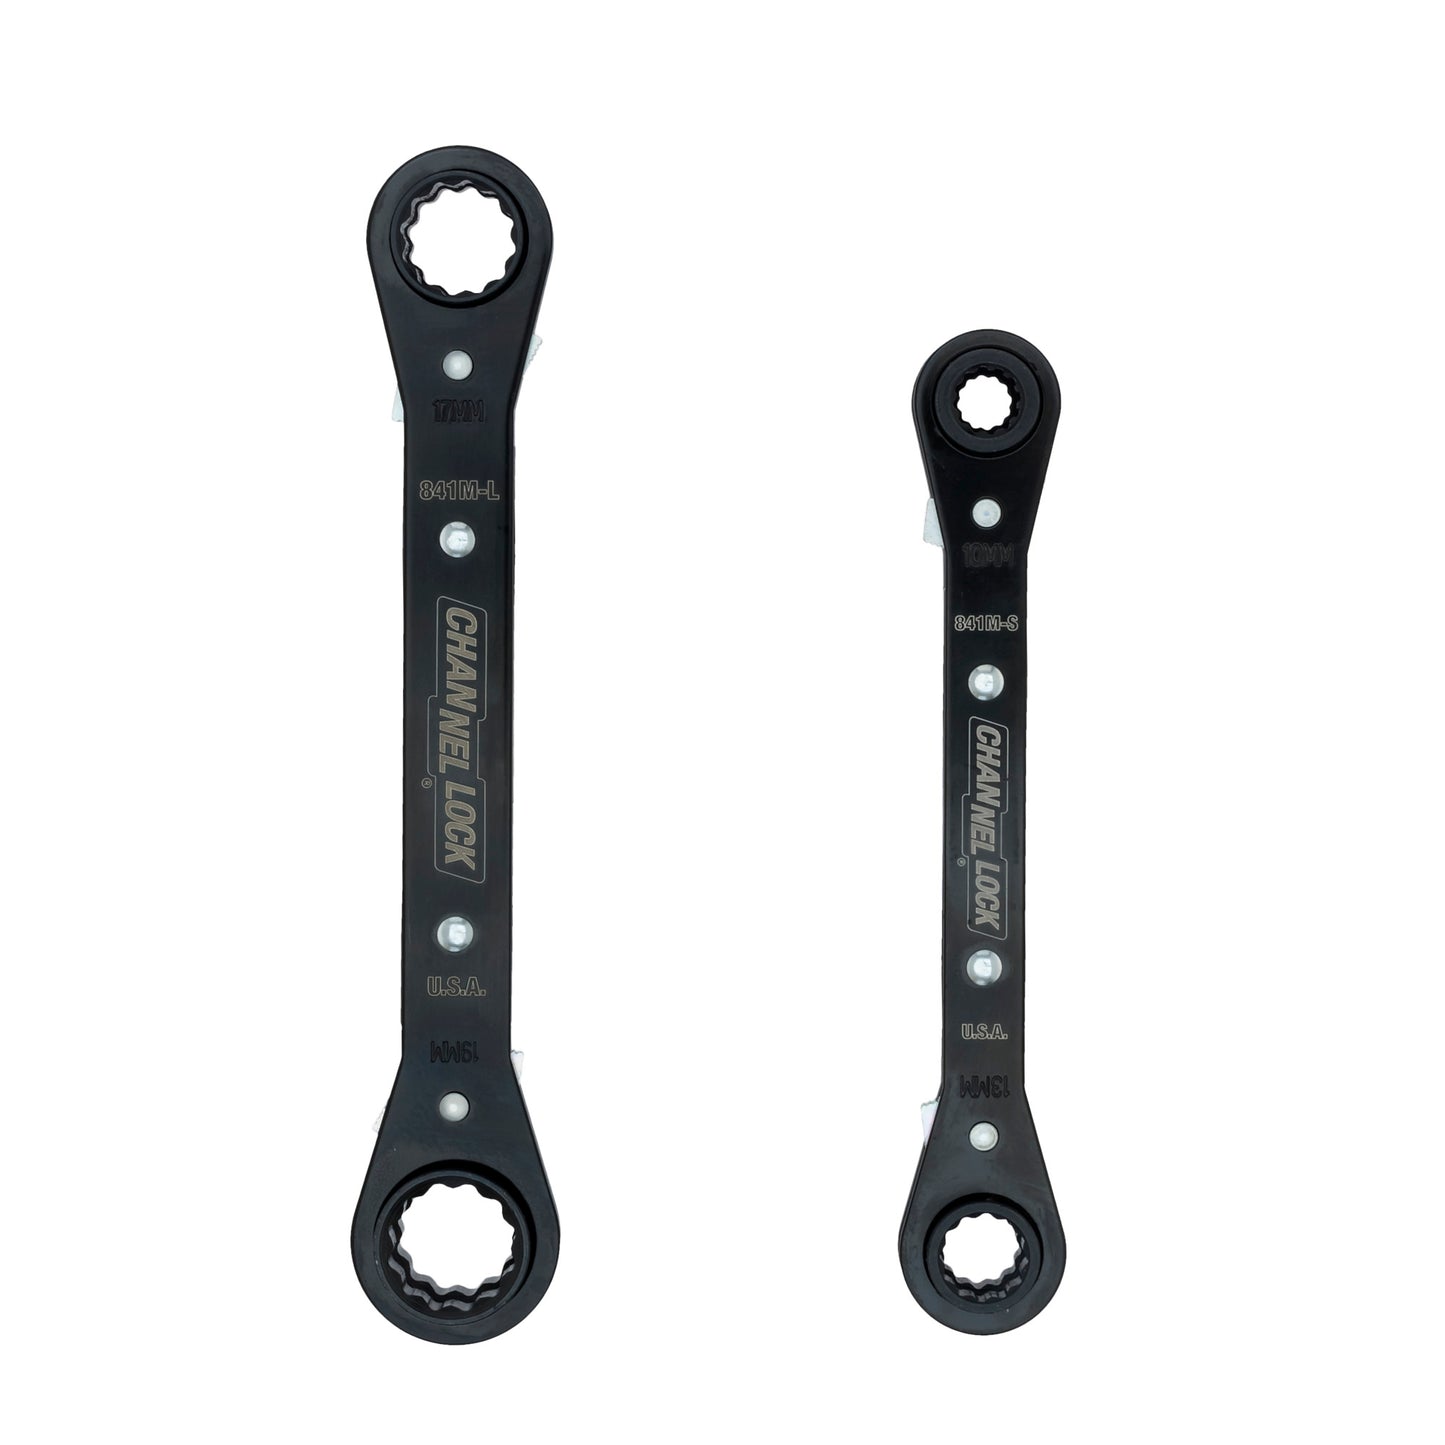 2pc Metric Ratcheting Combination Wrench Set (841M)